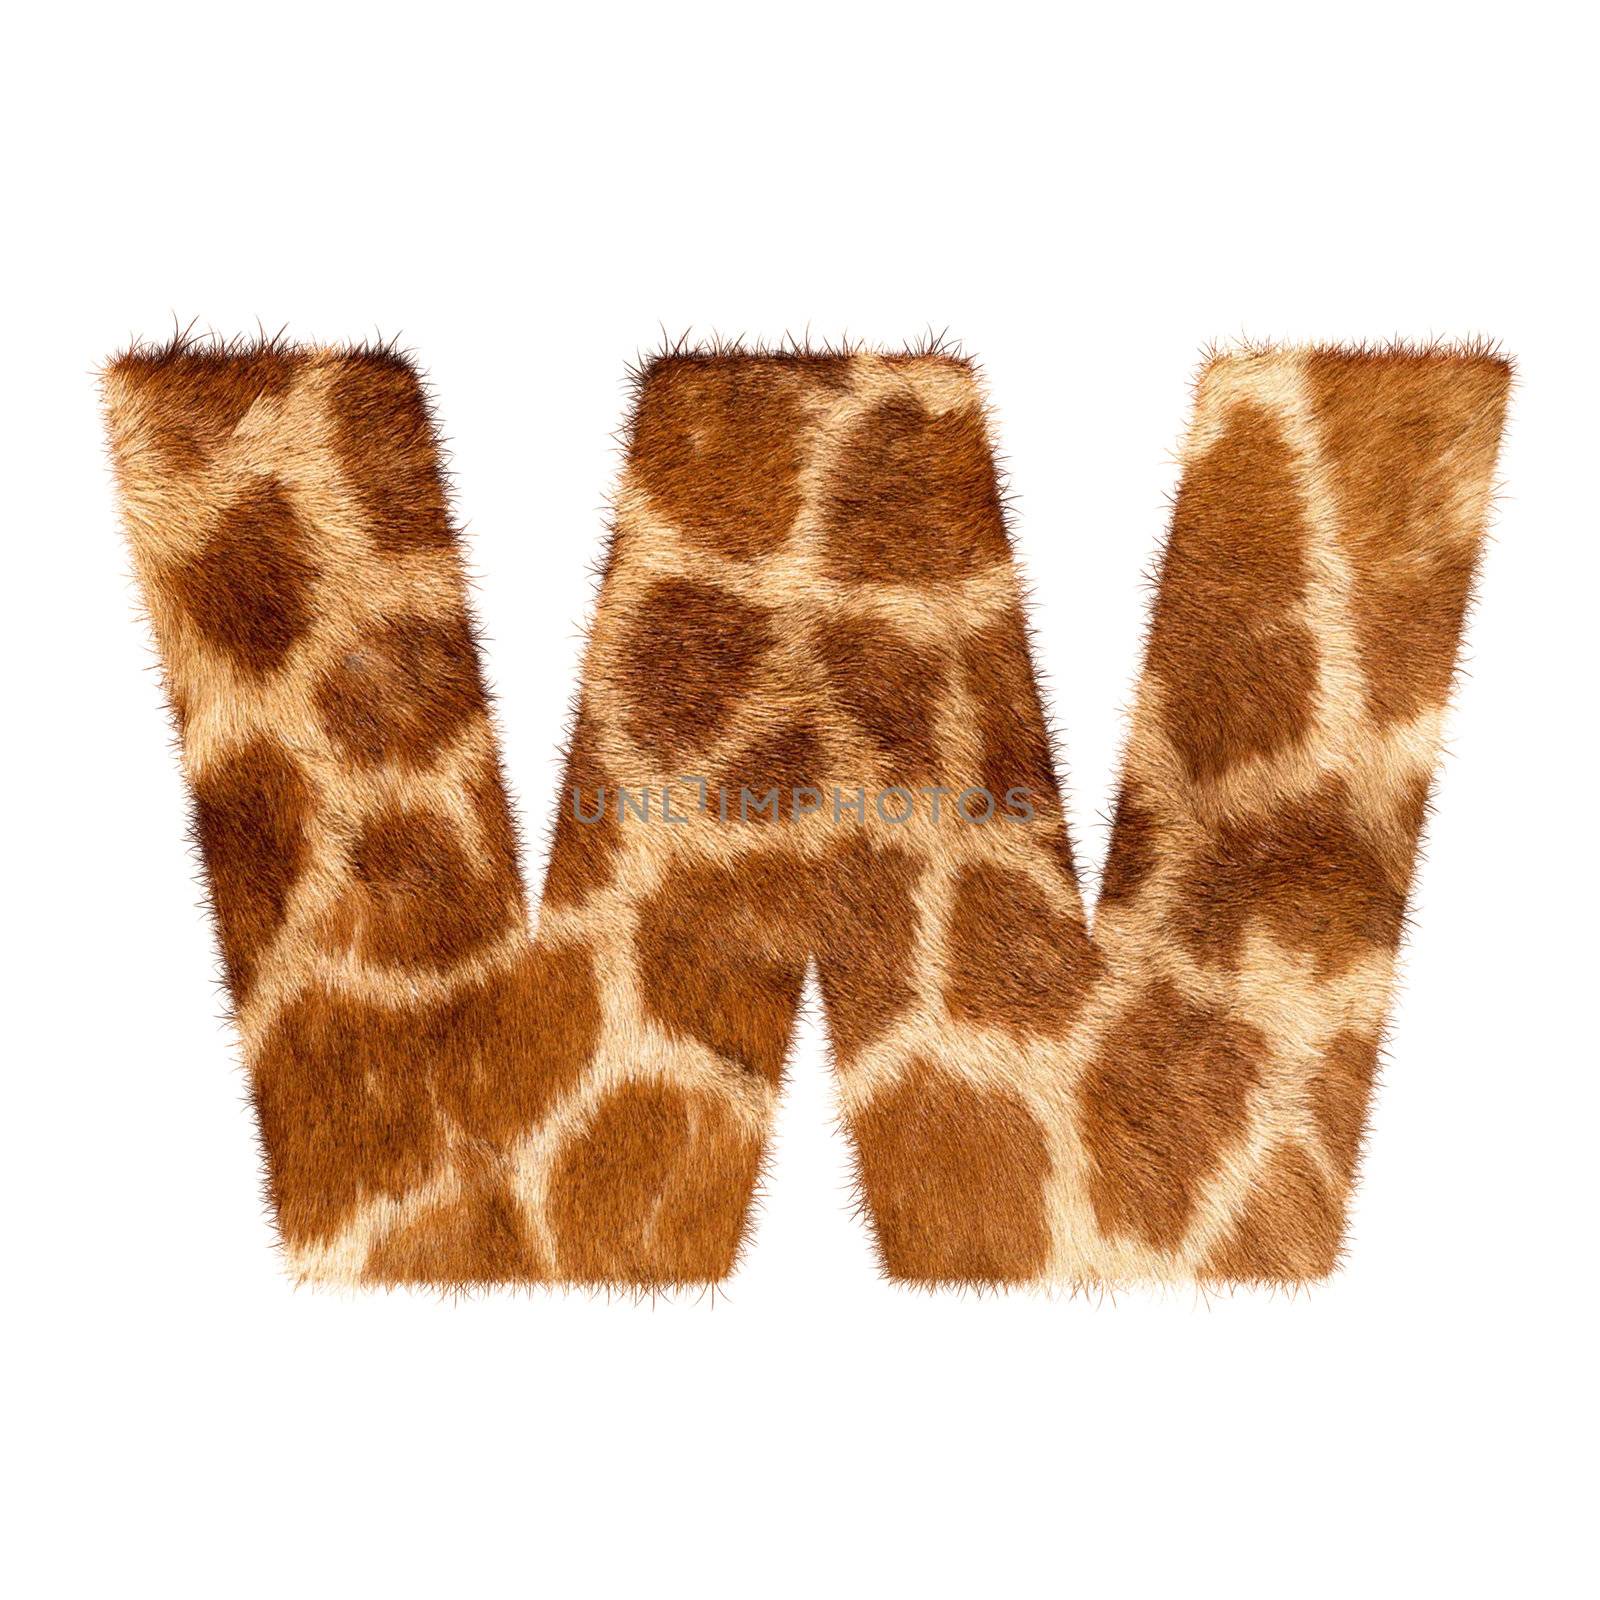 Letter from giraffe style fur alphabet. Isolated on white background. With clipping path.